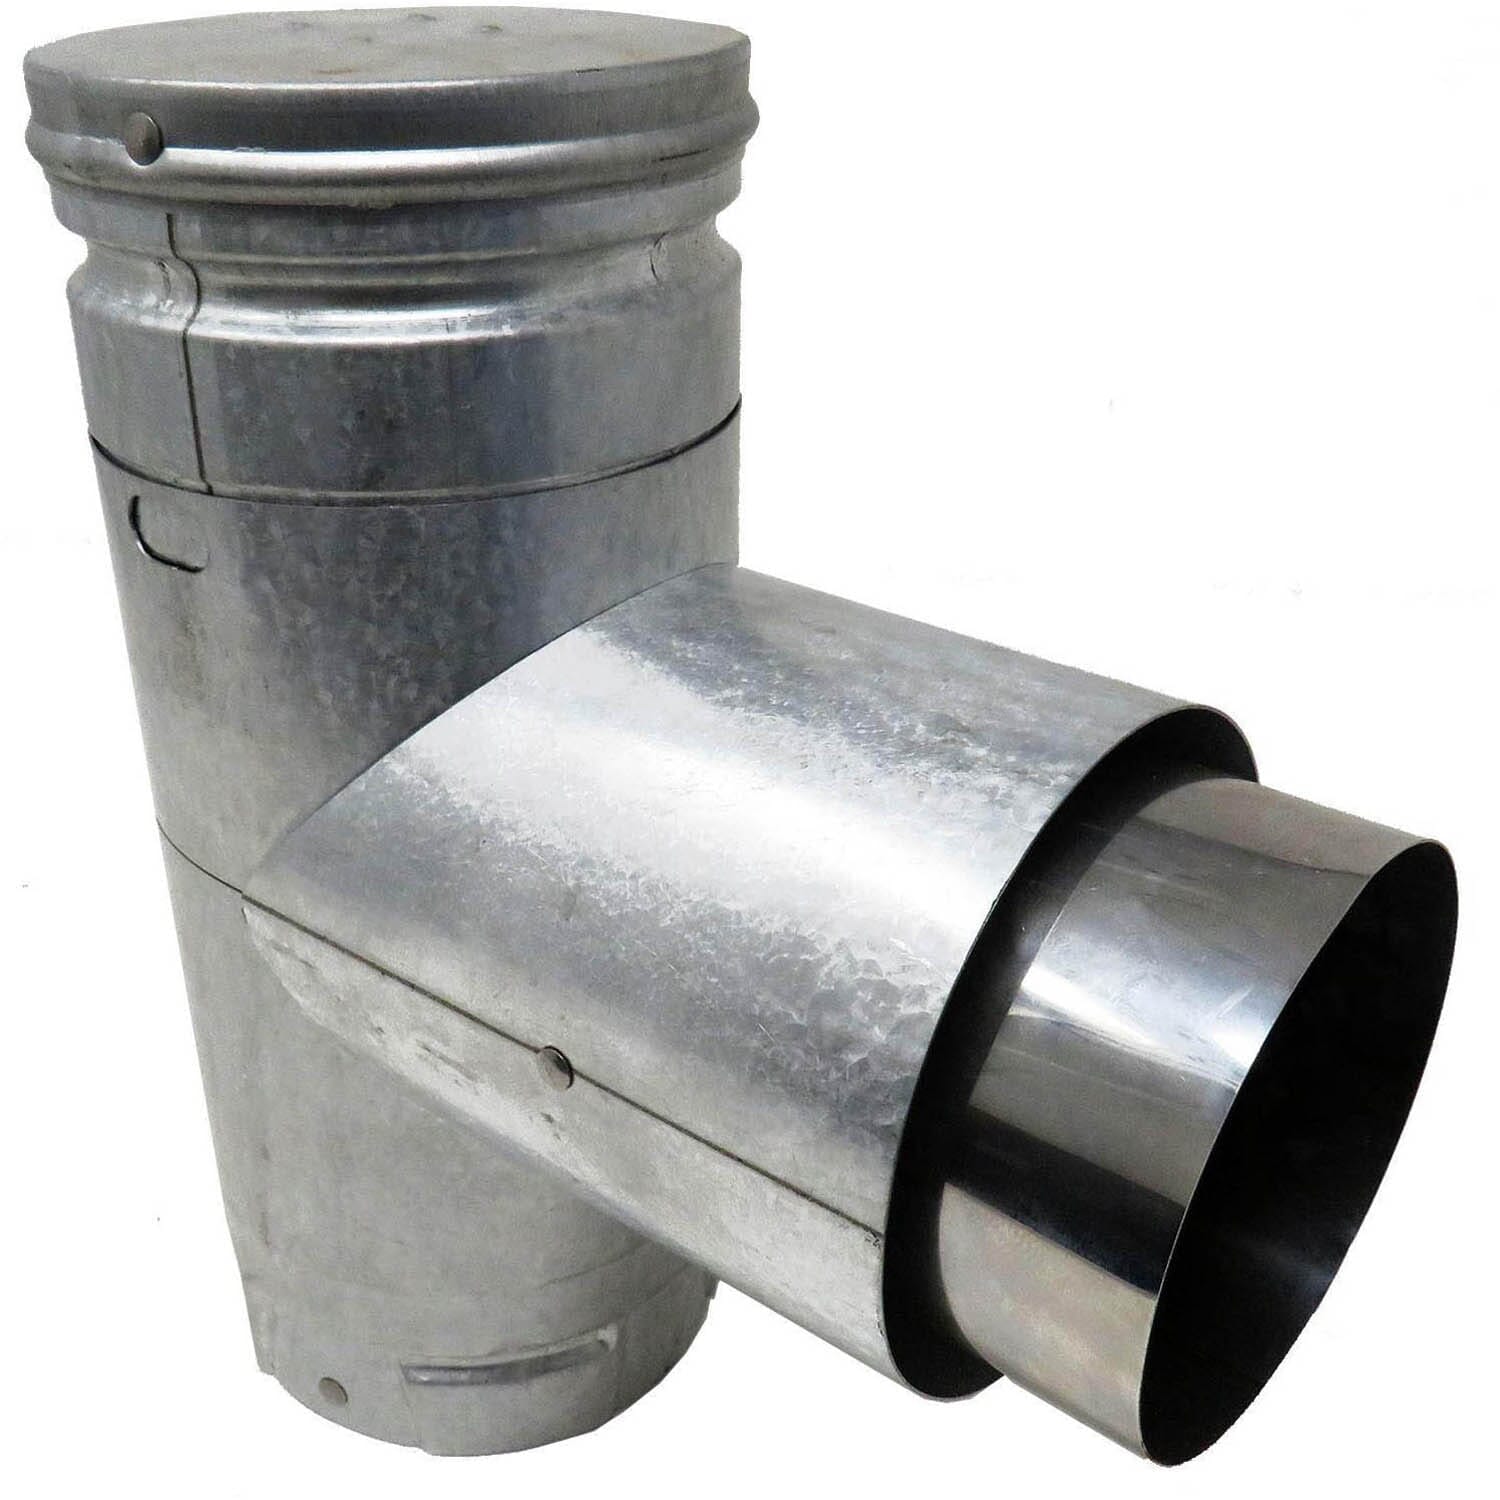 DuraVent Black Pellet Vent Pipe Adapter at